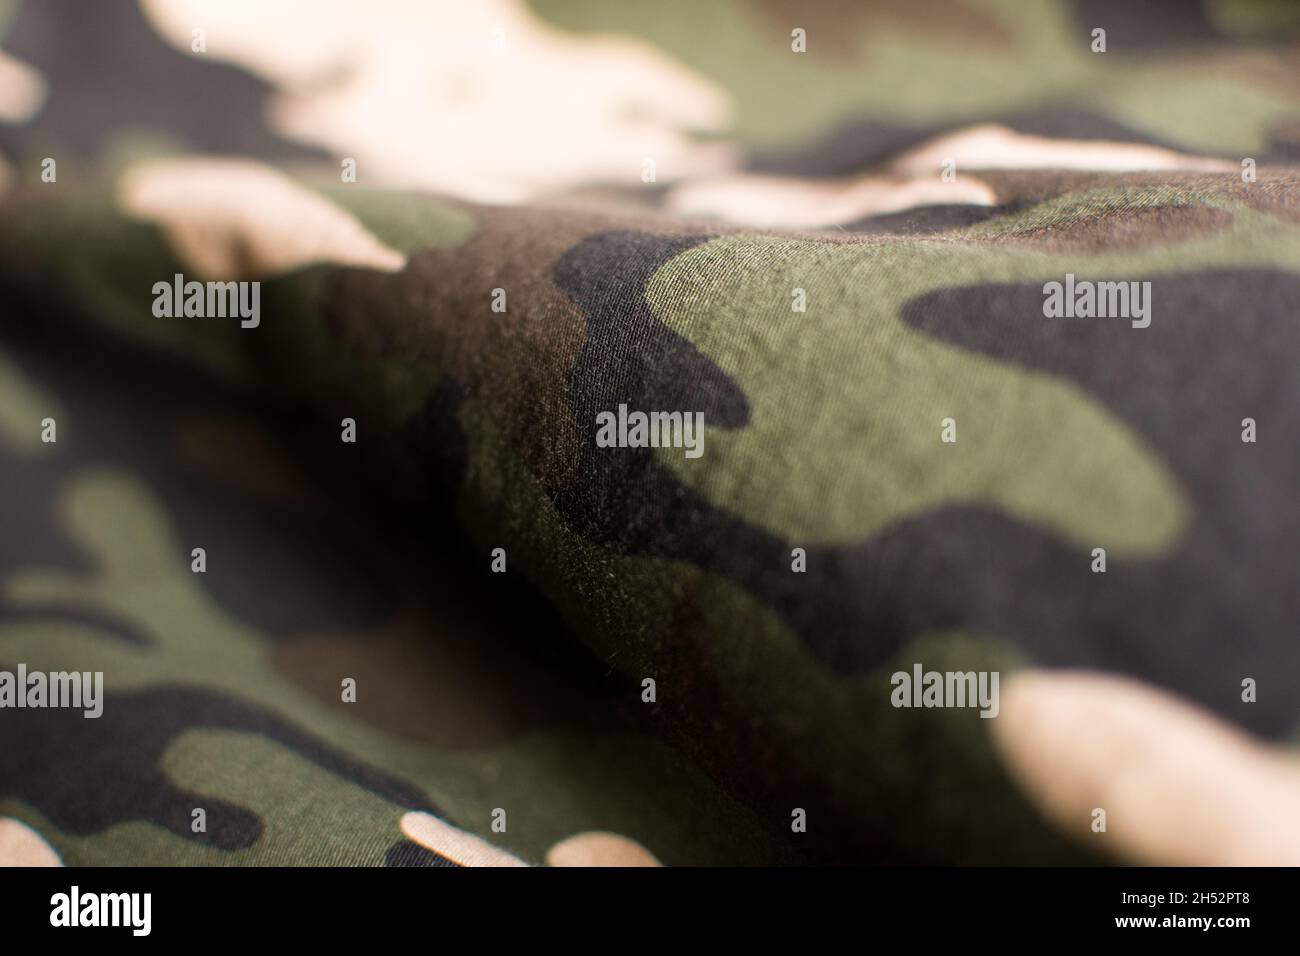 Military green, black, beige and brown uniform, close up Stock Photo